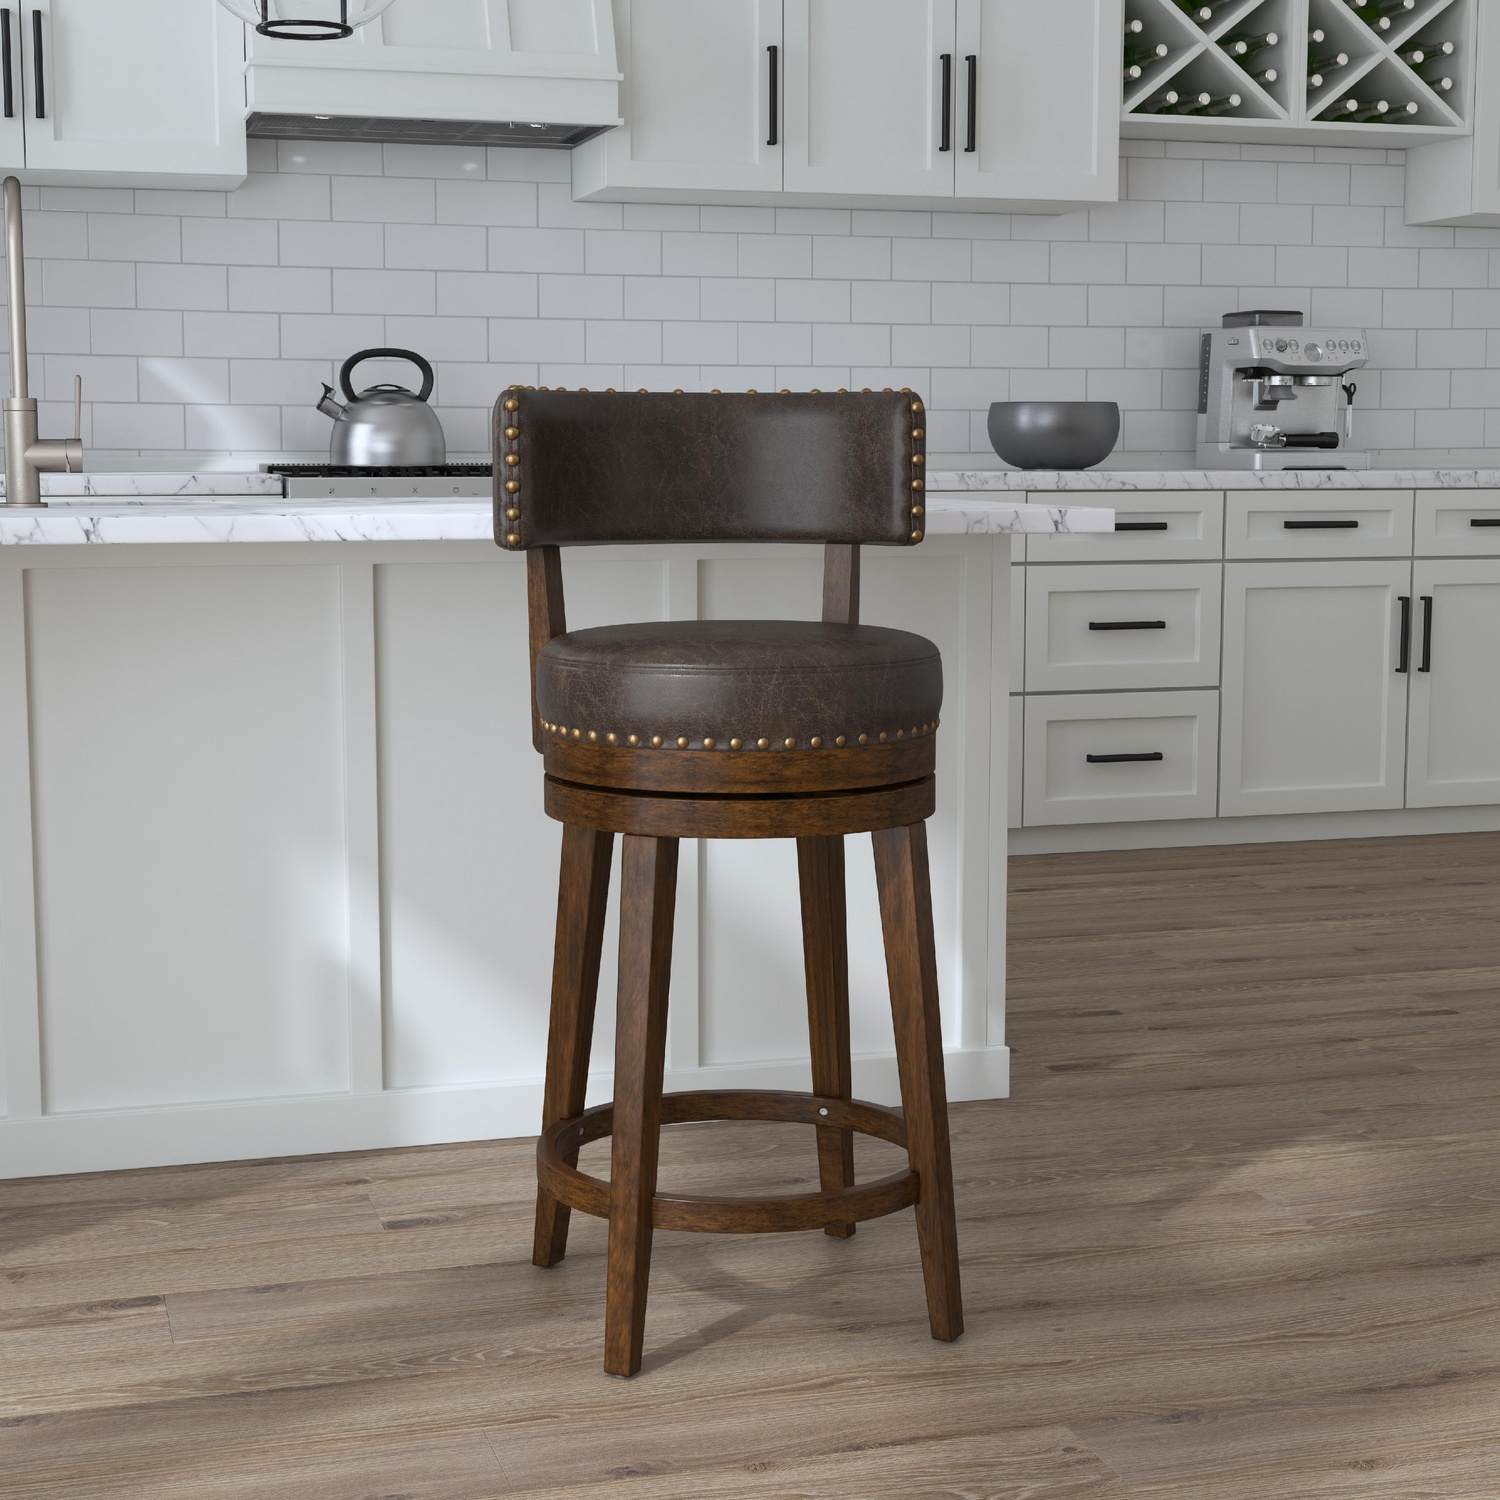 Hillsdale Lawton Wood Counter Height Swivel Stool - Walnut/Aged Brown Faux Leather